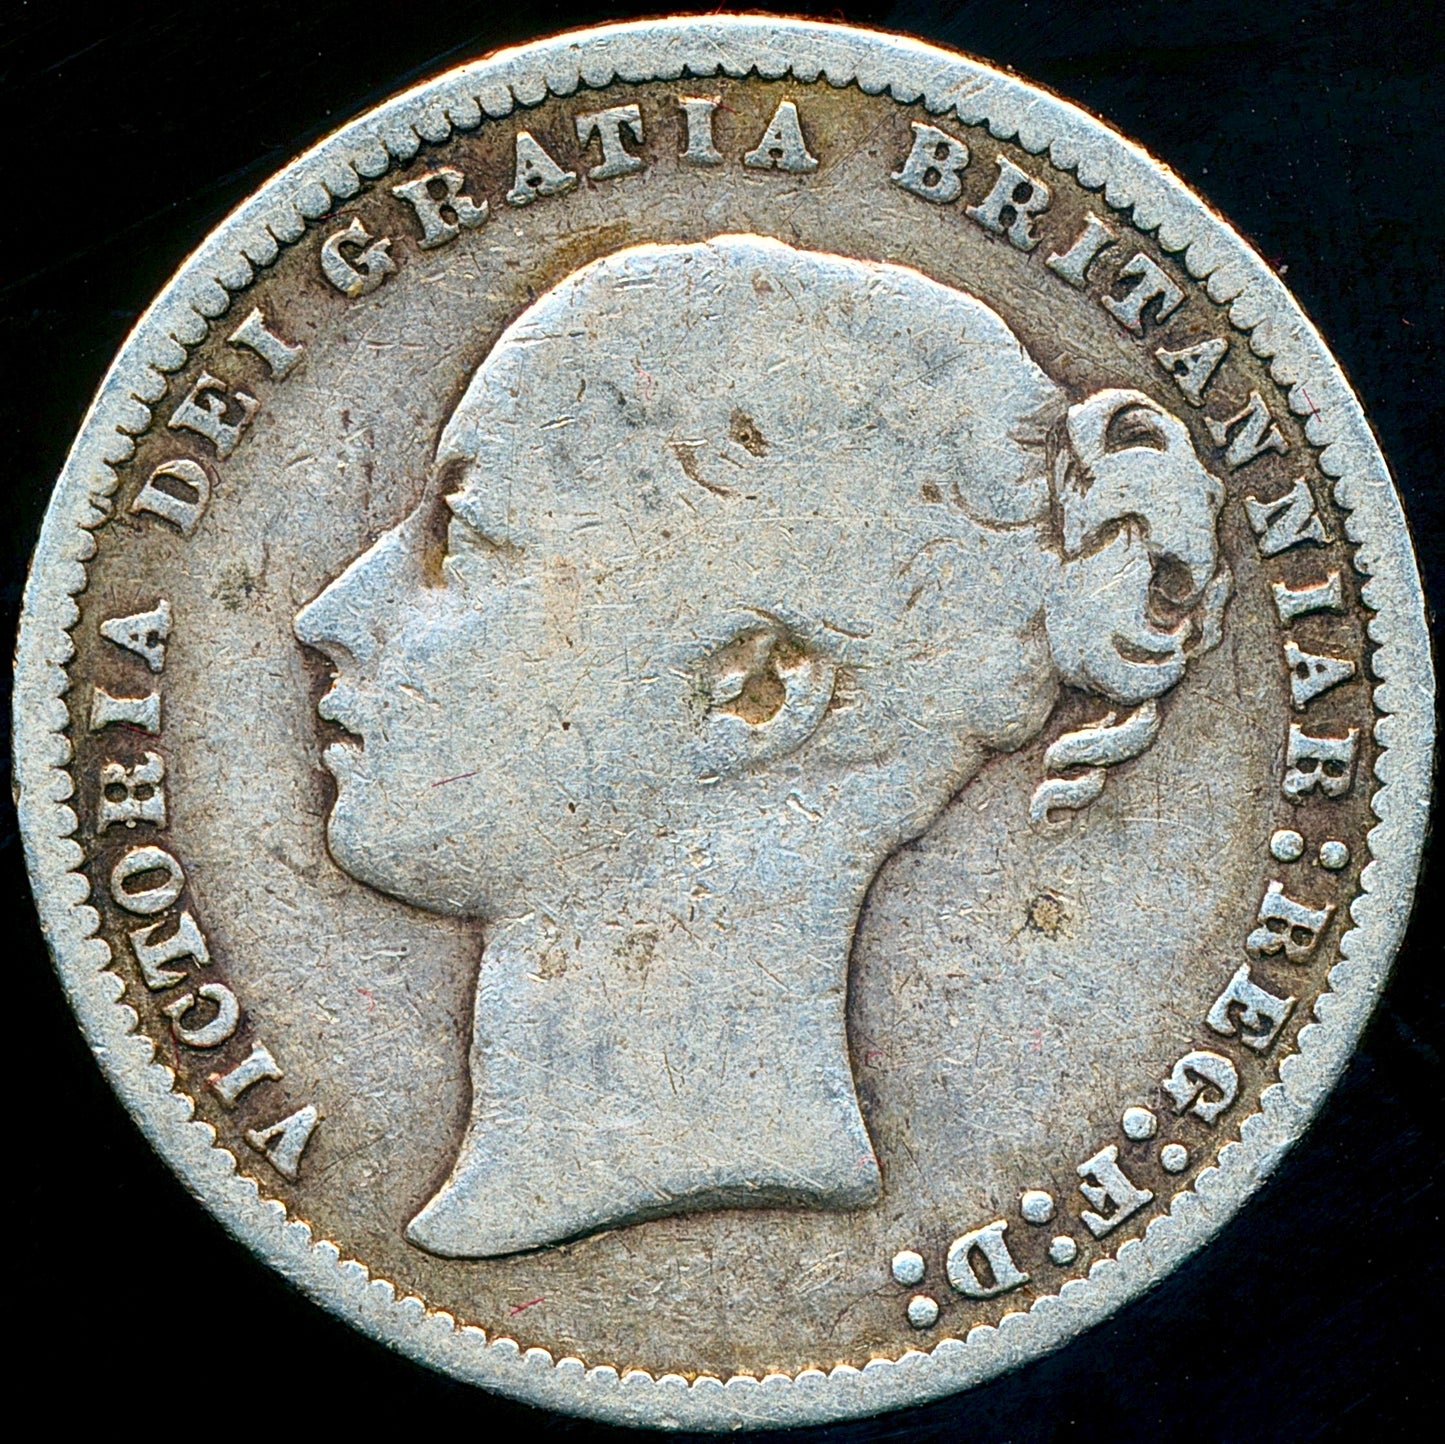 1879 Shilling Third young head no die number S3906 ESC 3059 F